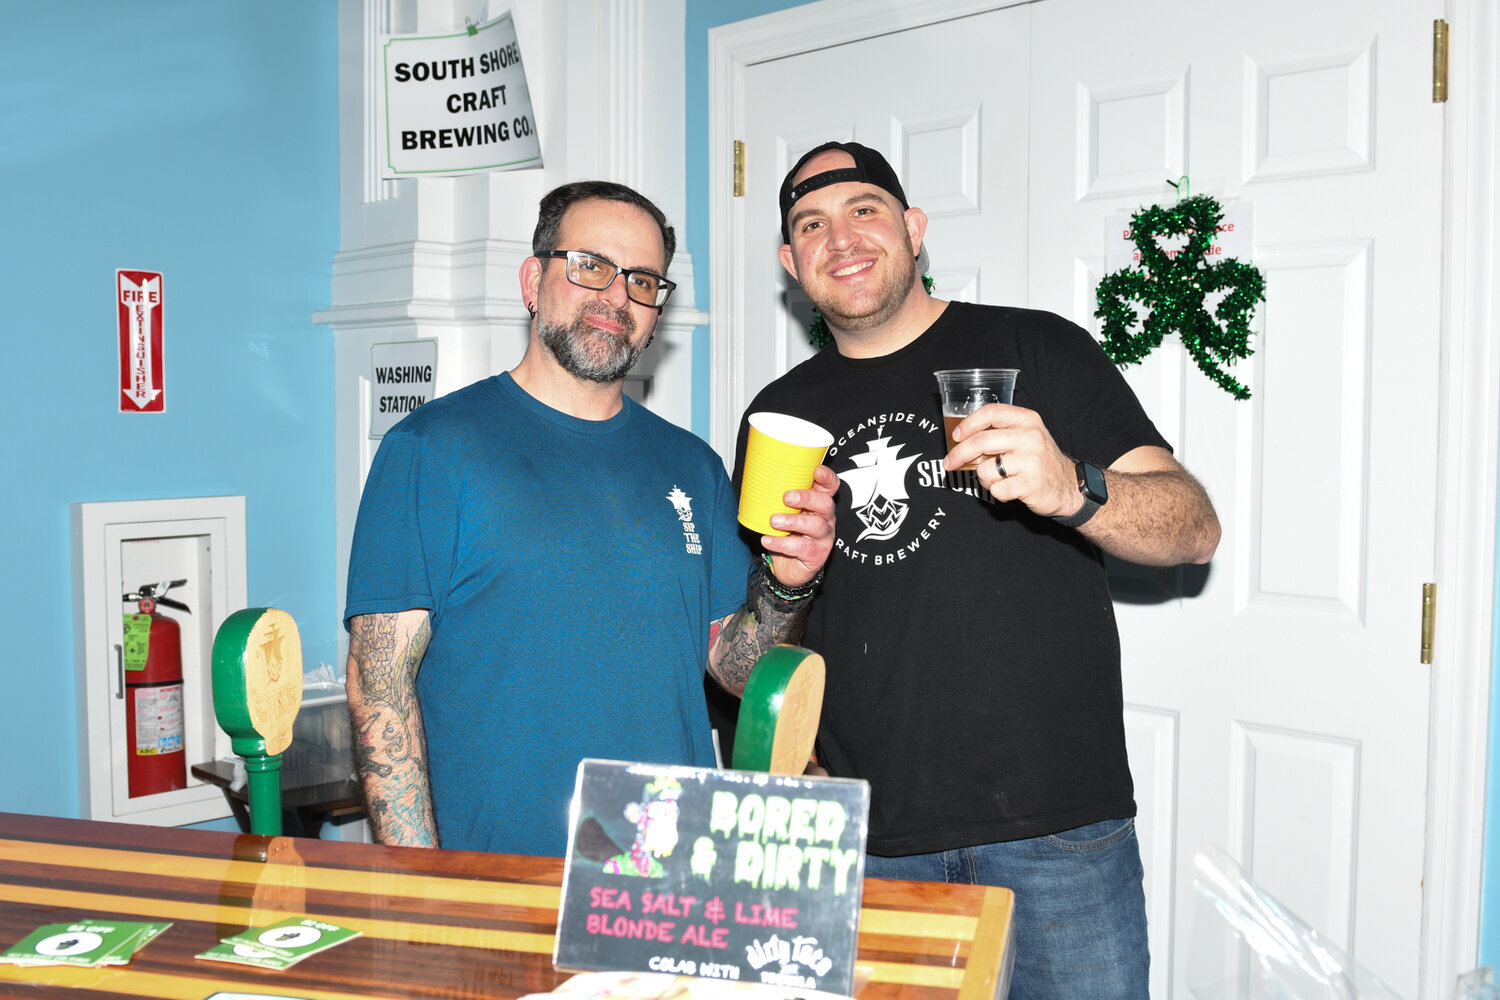 Dan Landerer, left, manager of the South Shore Craft Brewing company in Oceanside and Brew Master Pete Tripp celebrate with a toast.